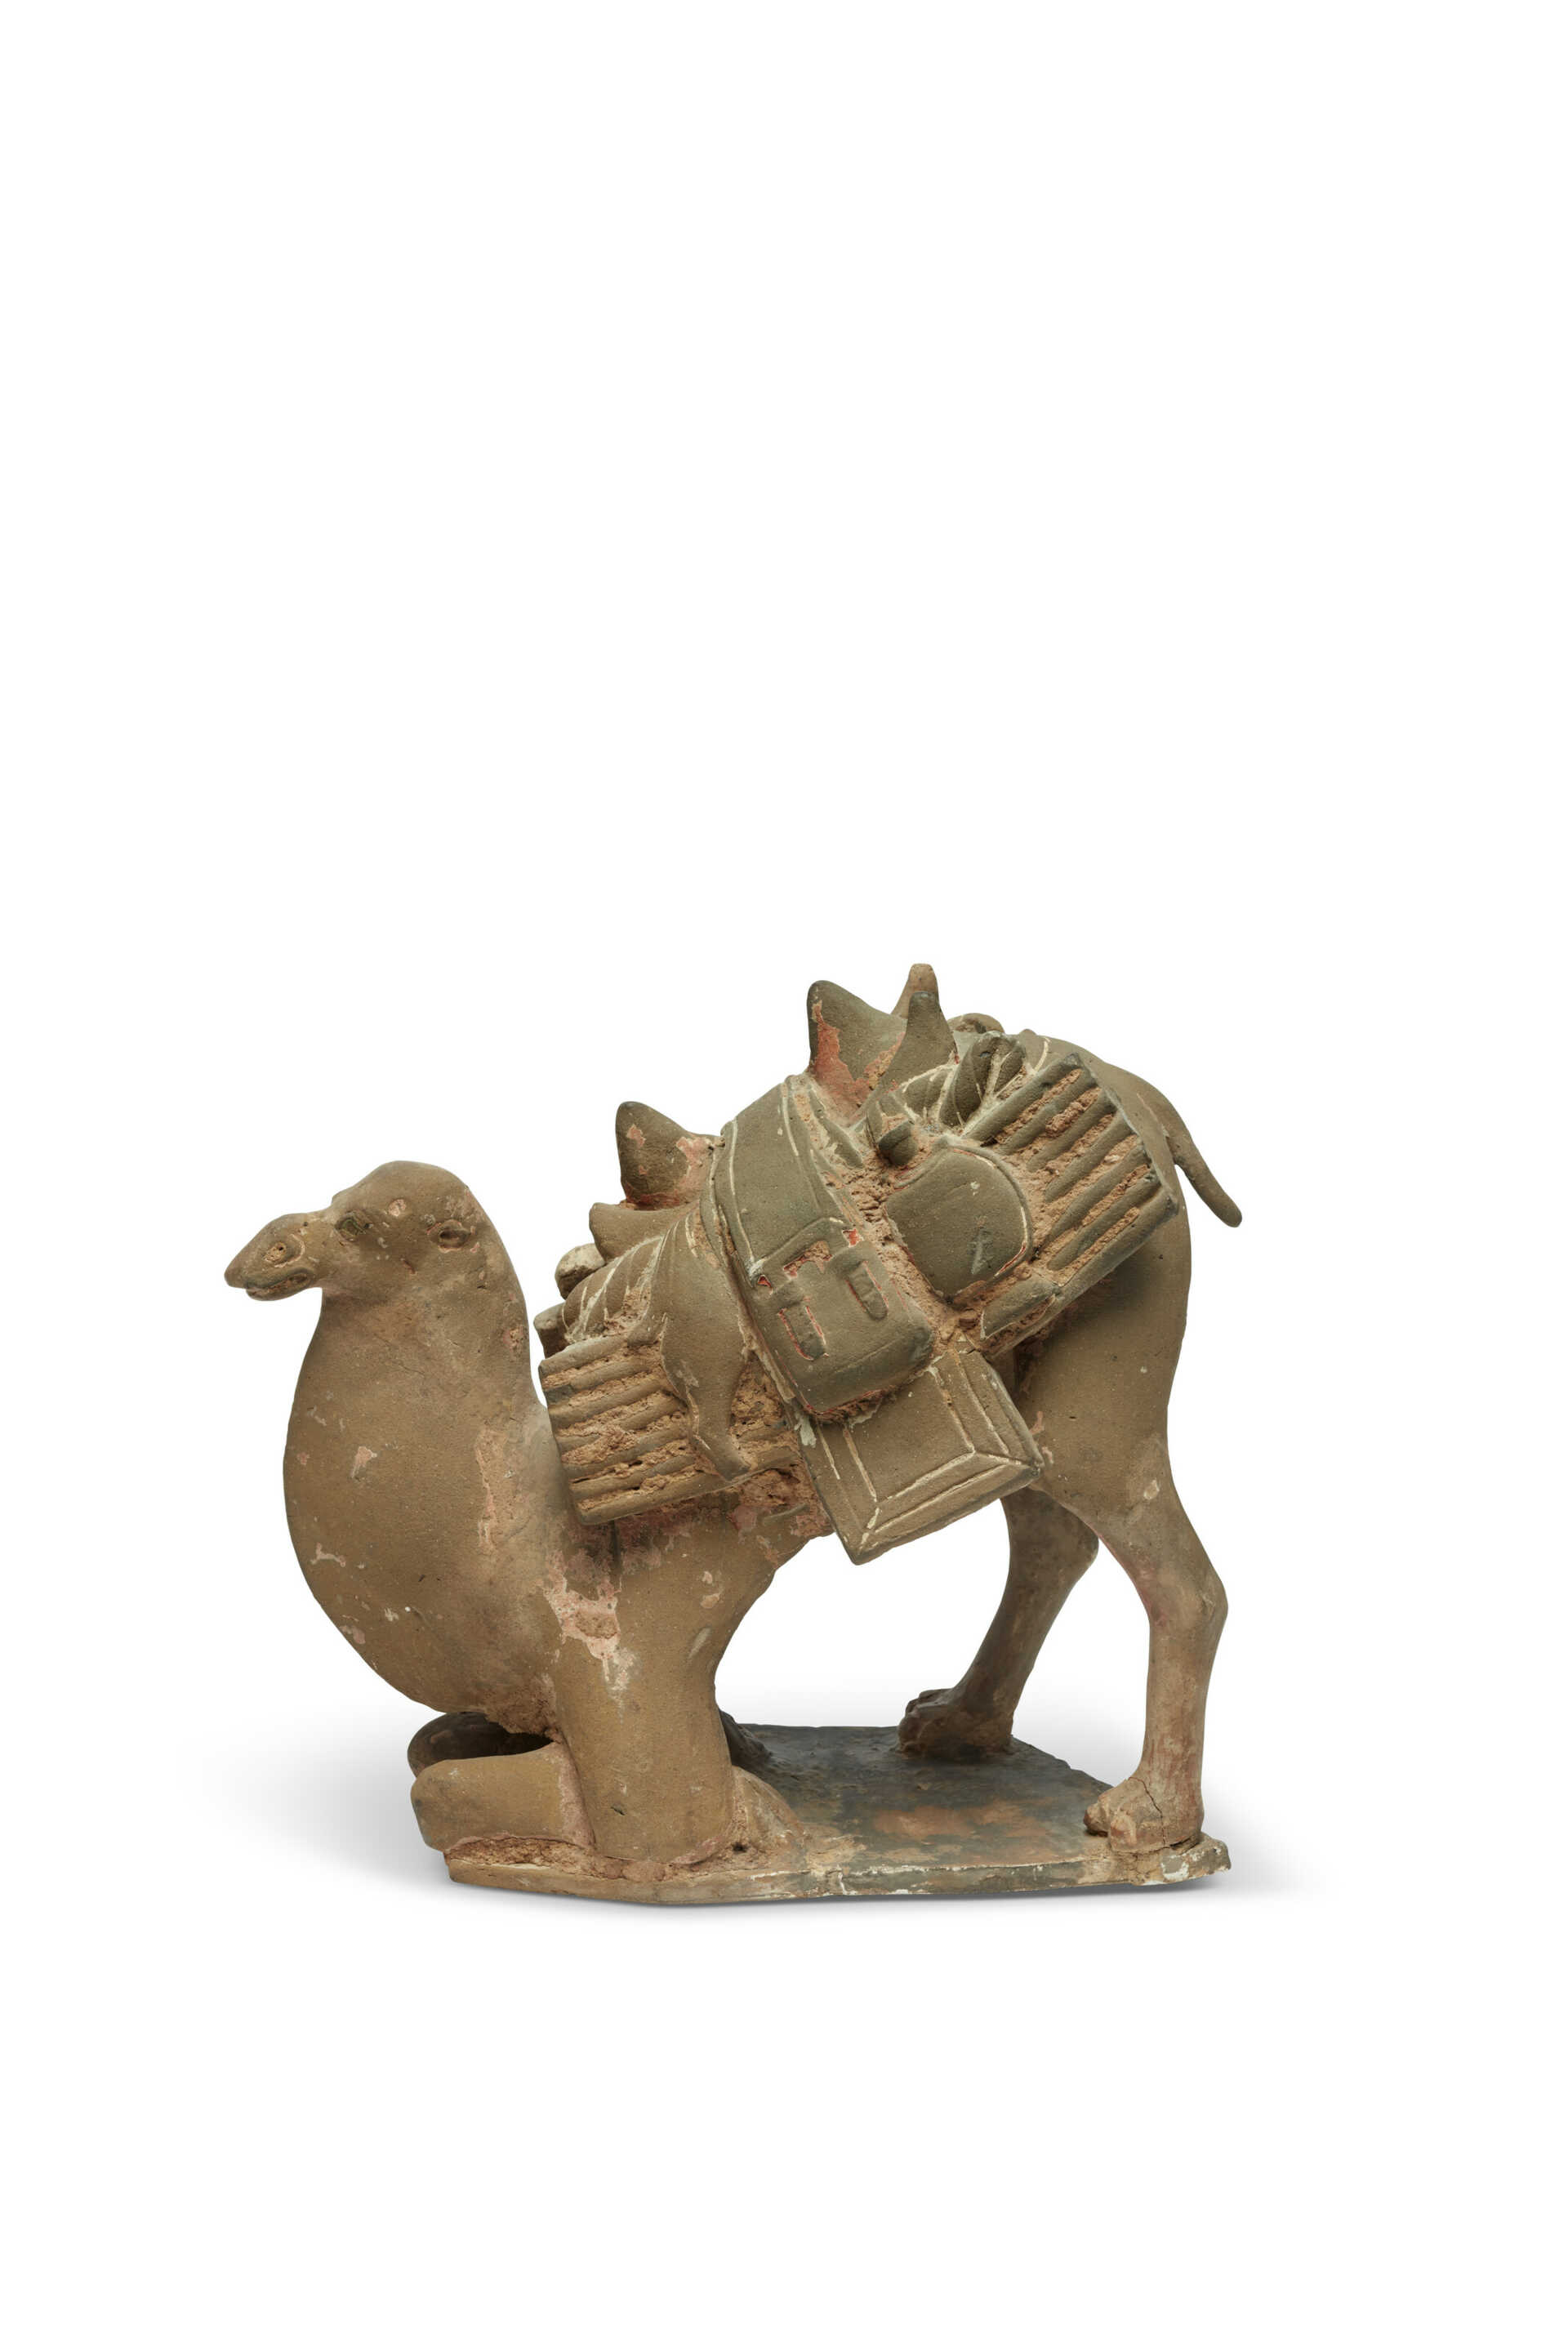 A PAINTED POTTERY FIGURE OF A KNEELING CAMEL